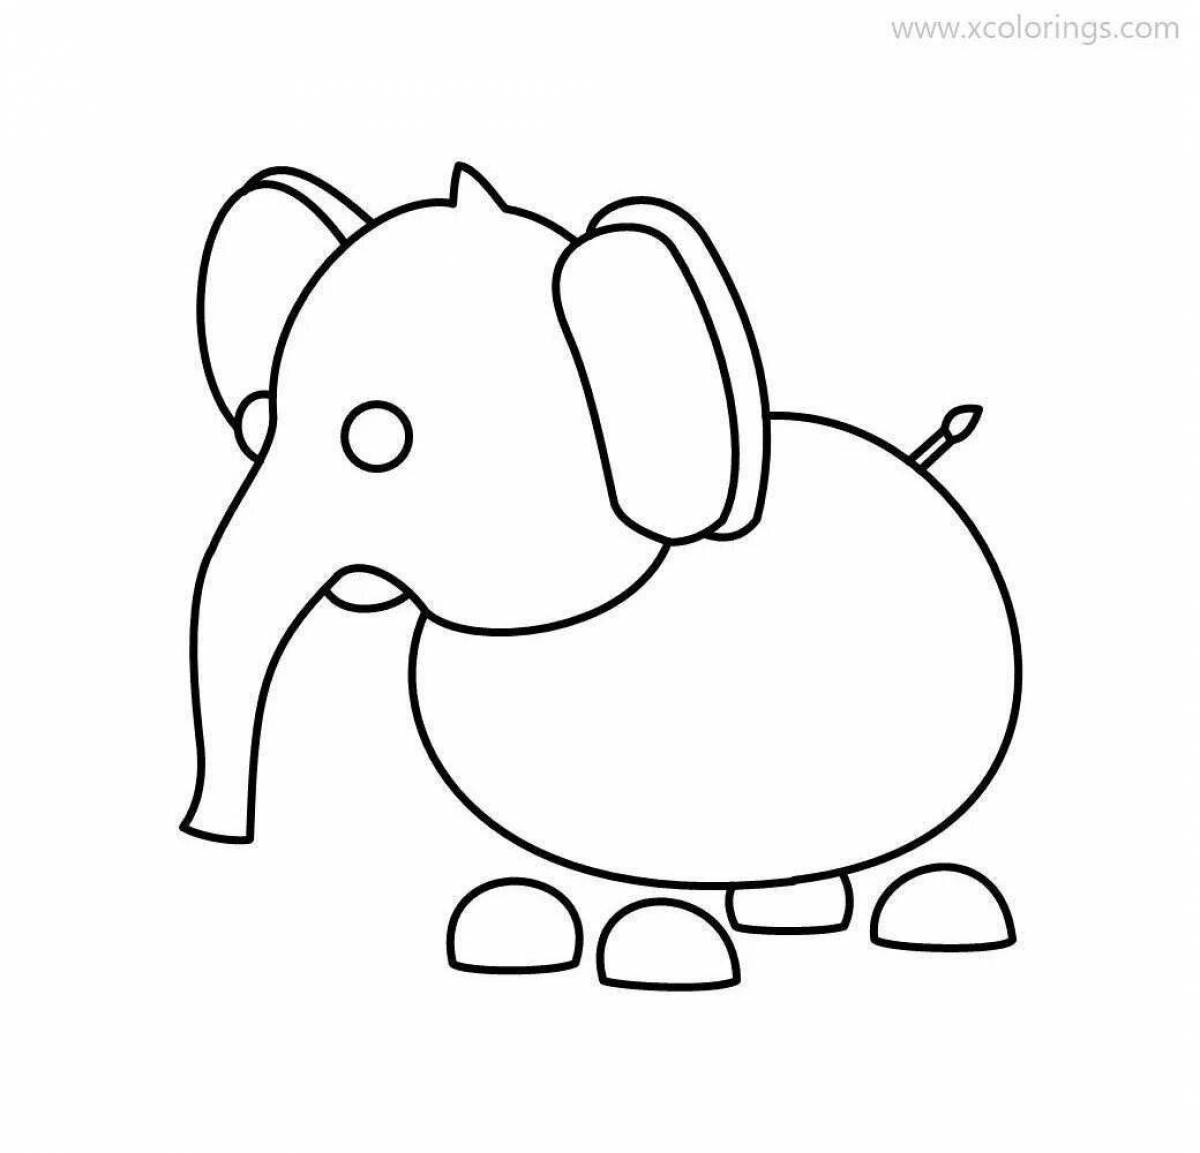 Colorful roblox animal coloring page